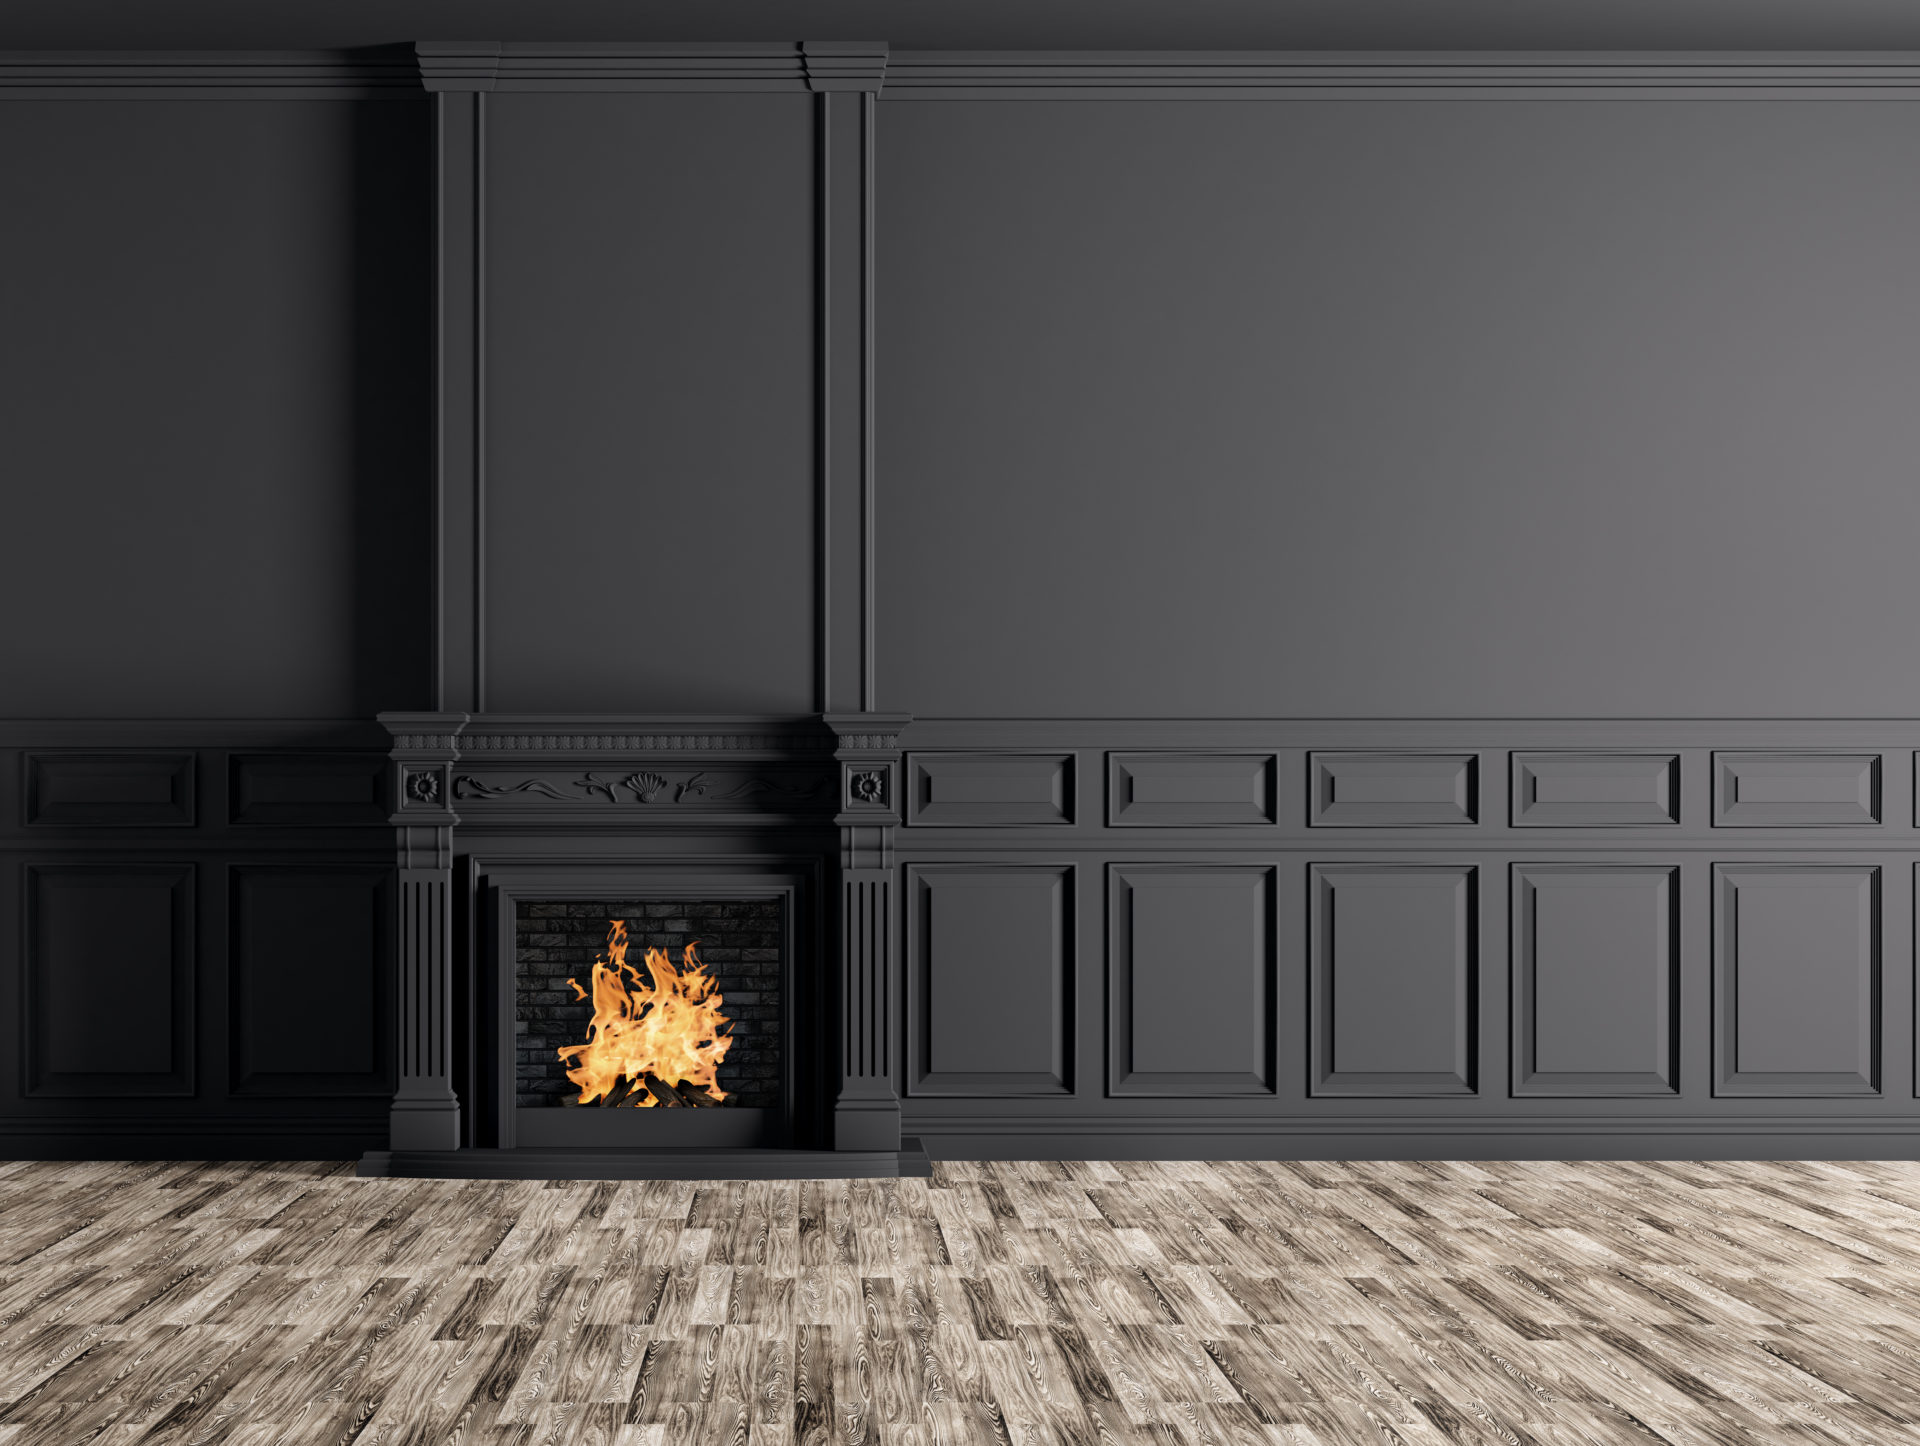 Empty Classic Interior Of A Room With Fireplace Over Black Wall